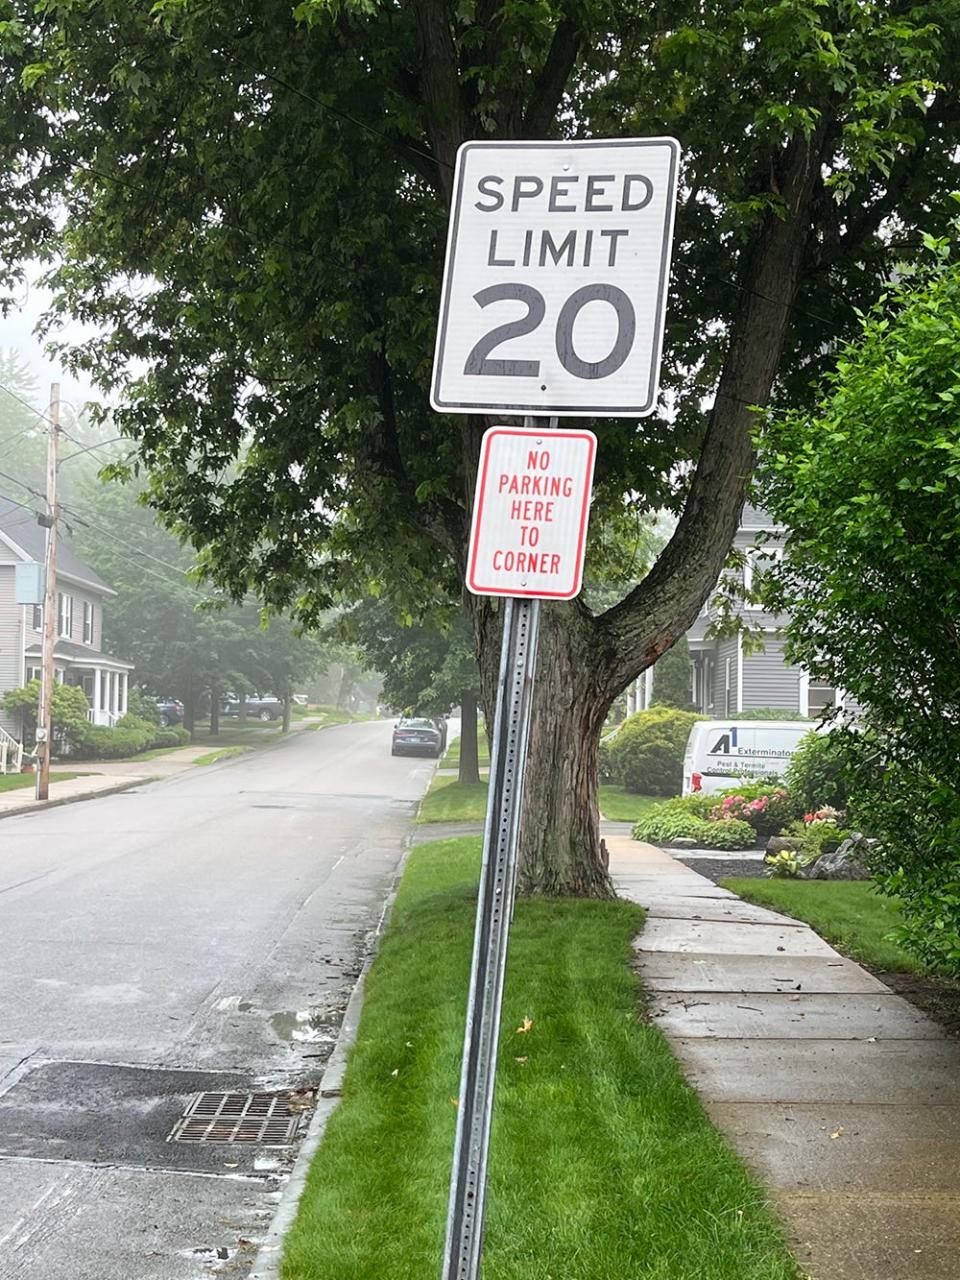 New Hampshire towns may be able to seasonally reduce speed limits to 20 mph on municipal roads during the busy summer months.